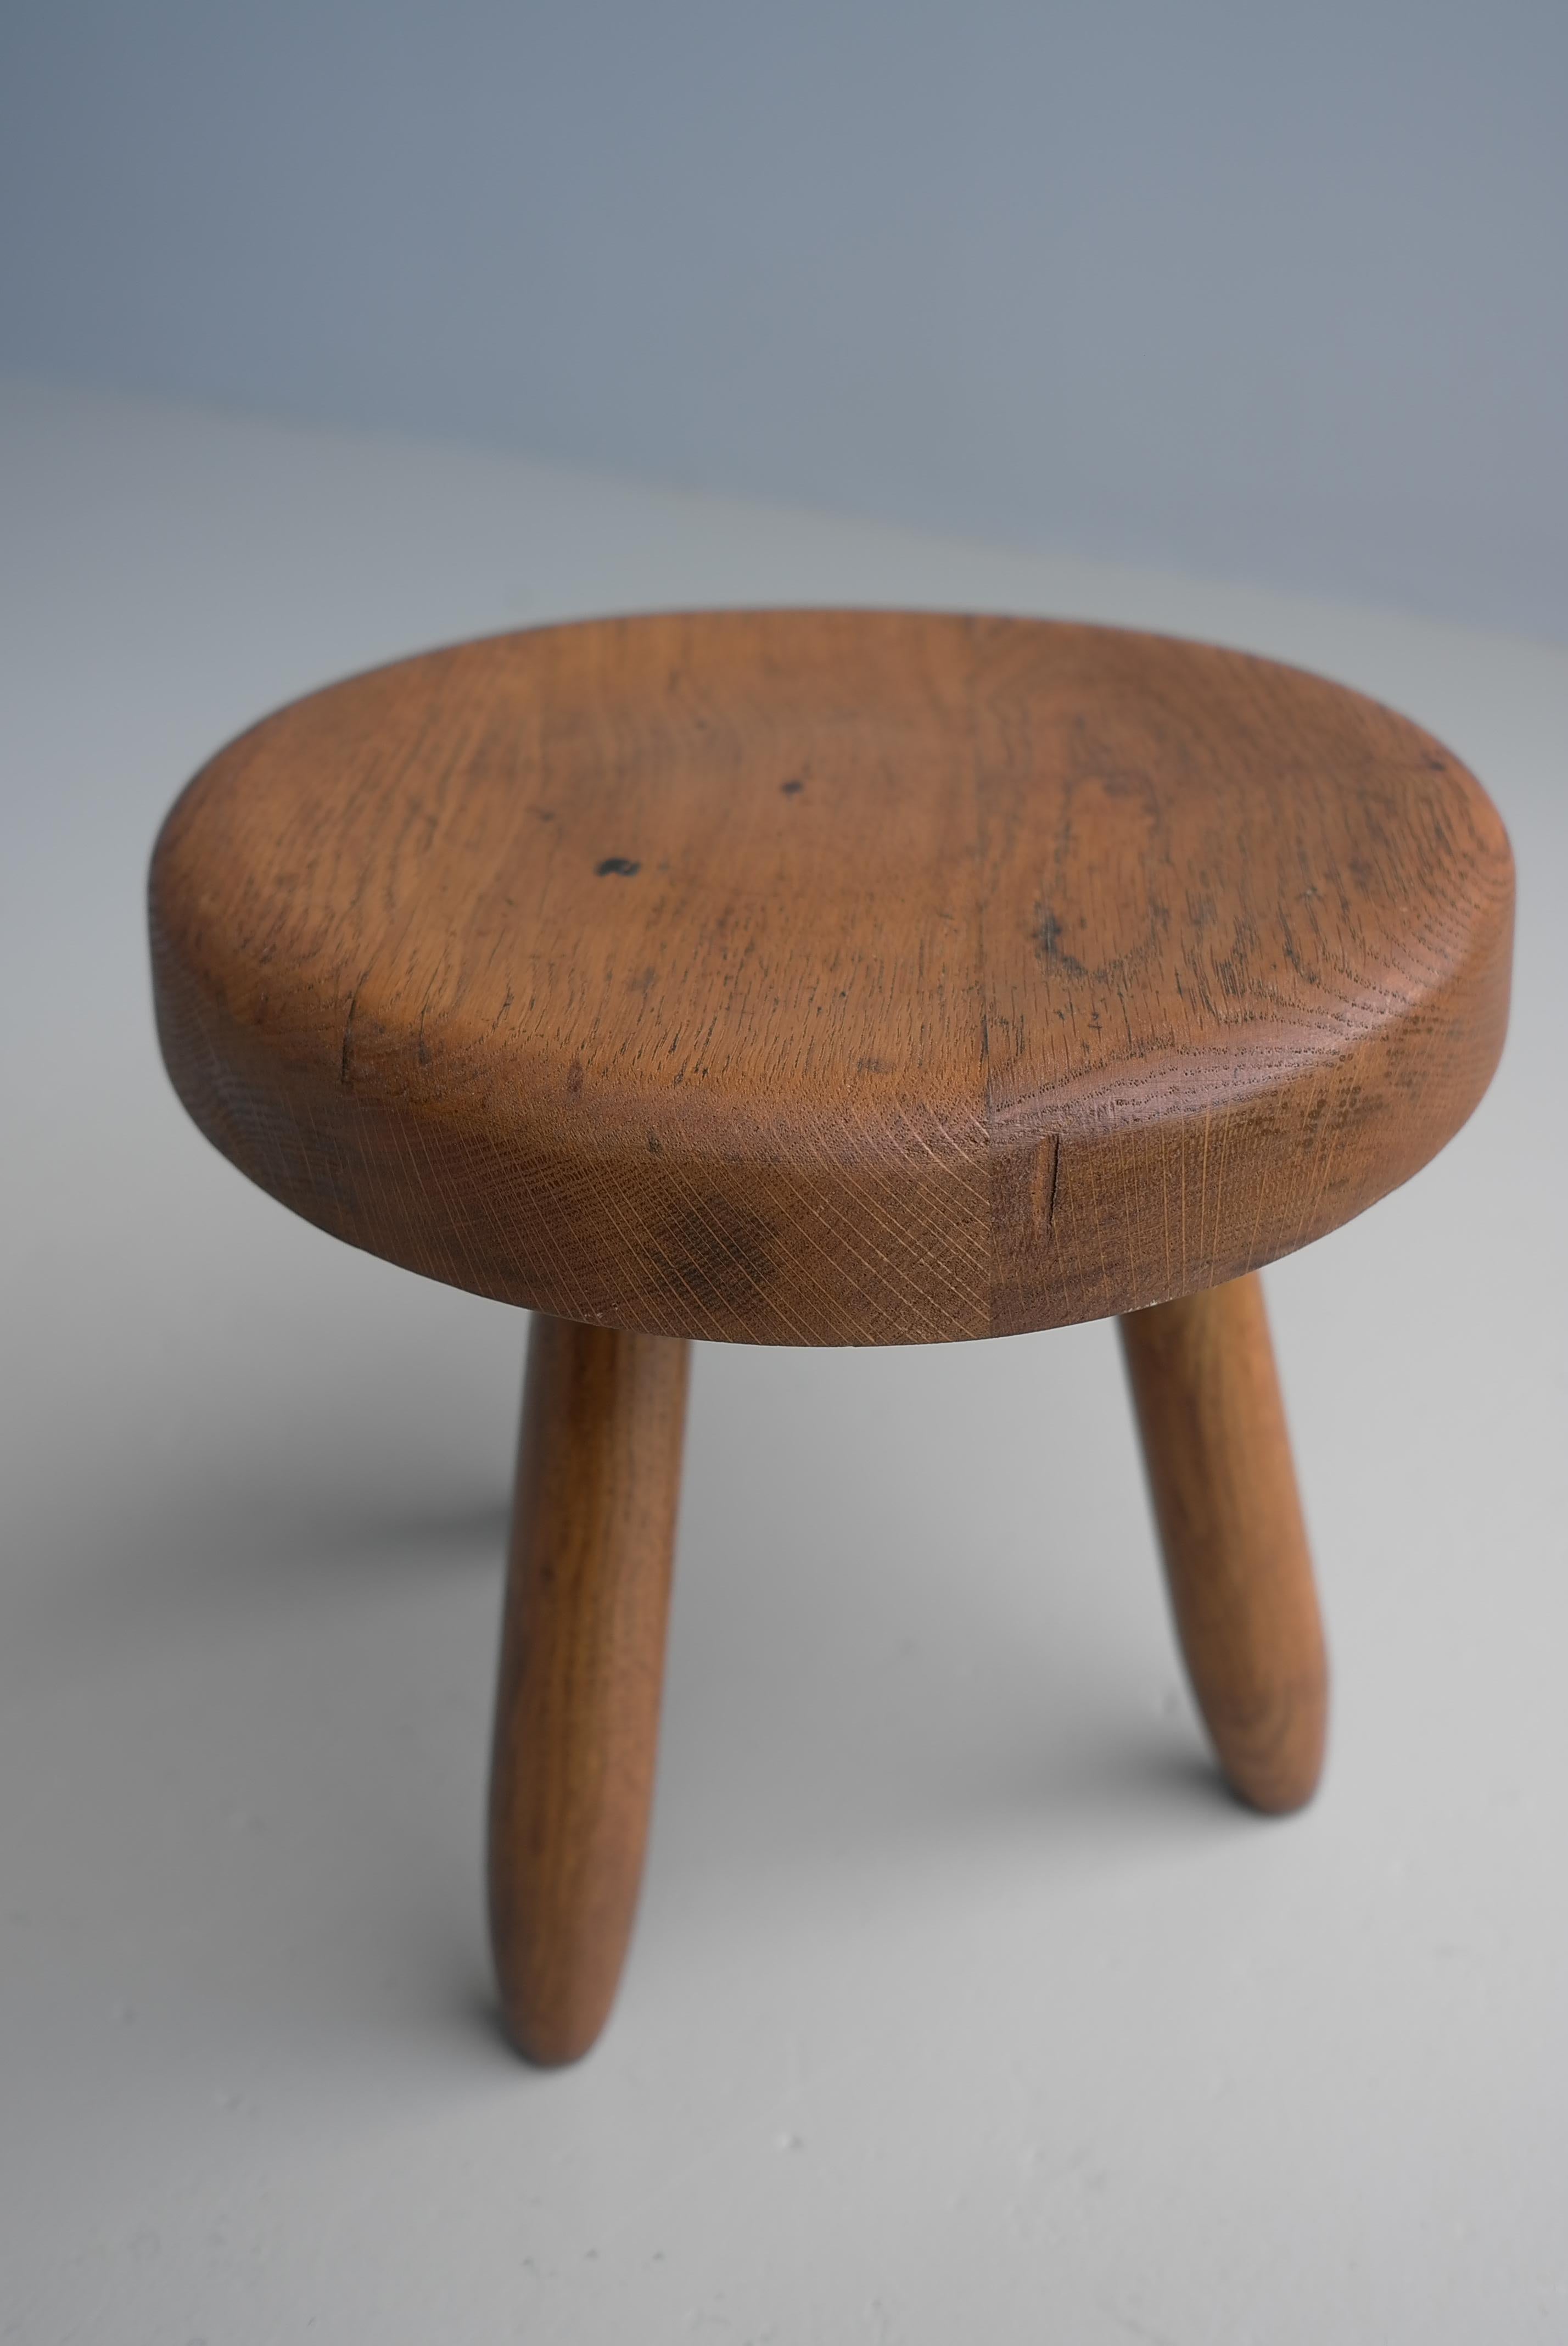 Solid Oak ' Berger' Stool in Style of Charlotte Perriand, France, 1950's For Sale 2